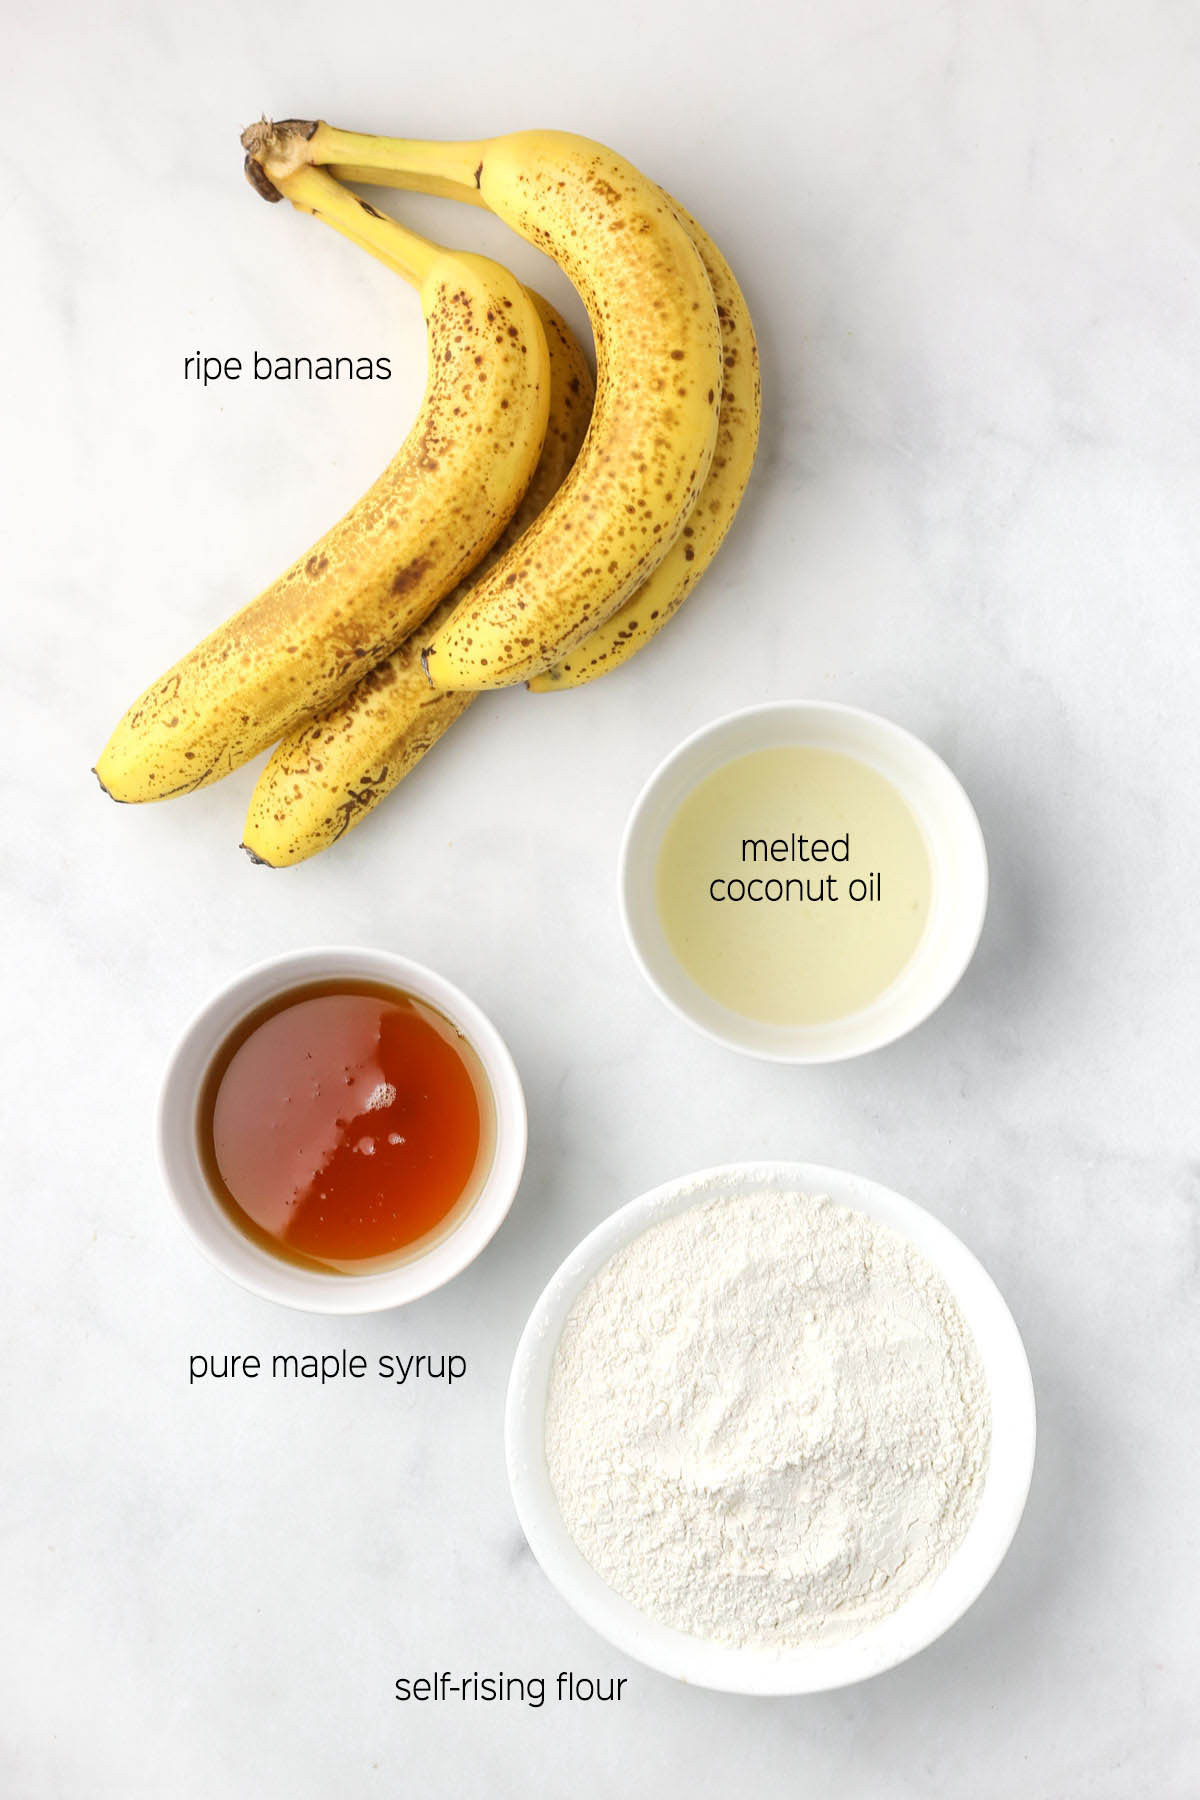 All ingredient to make the banana bread prepared in small dishes on a marble surface.